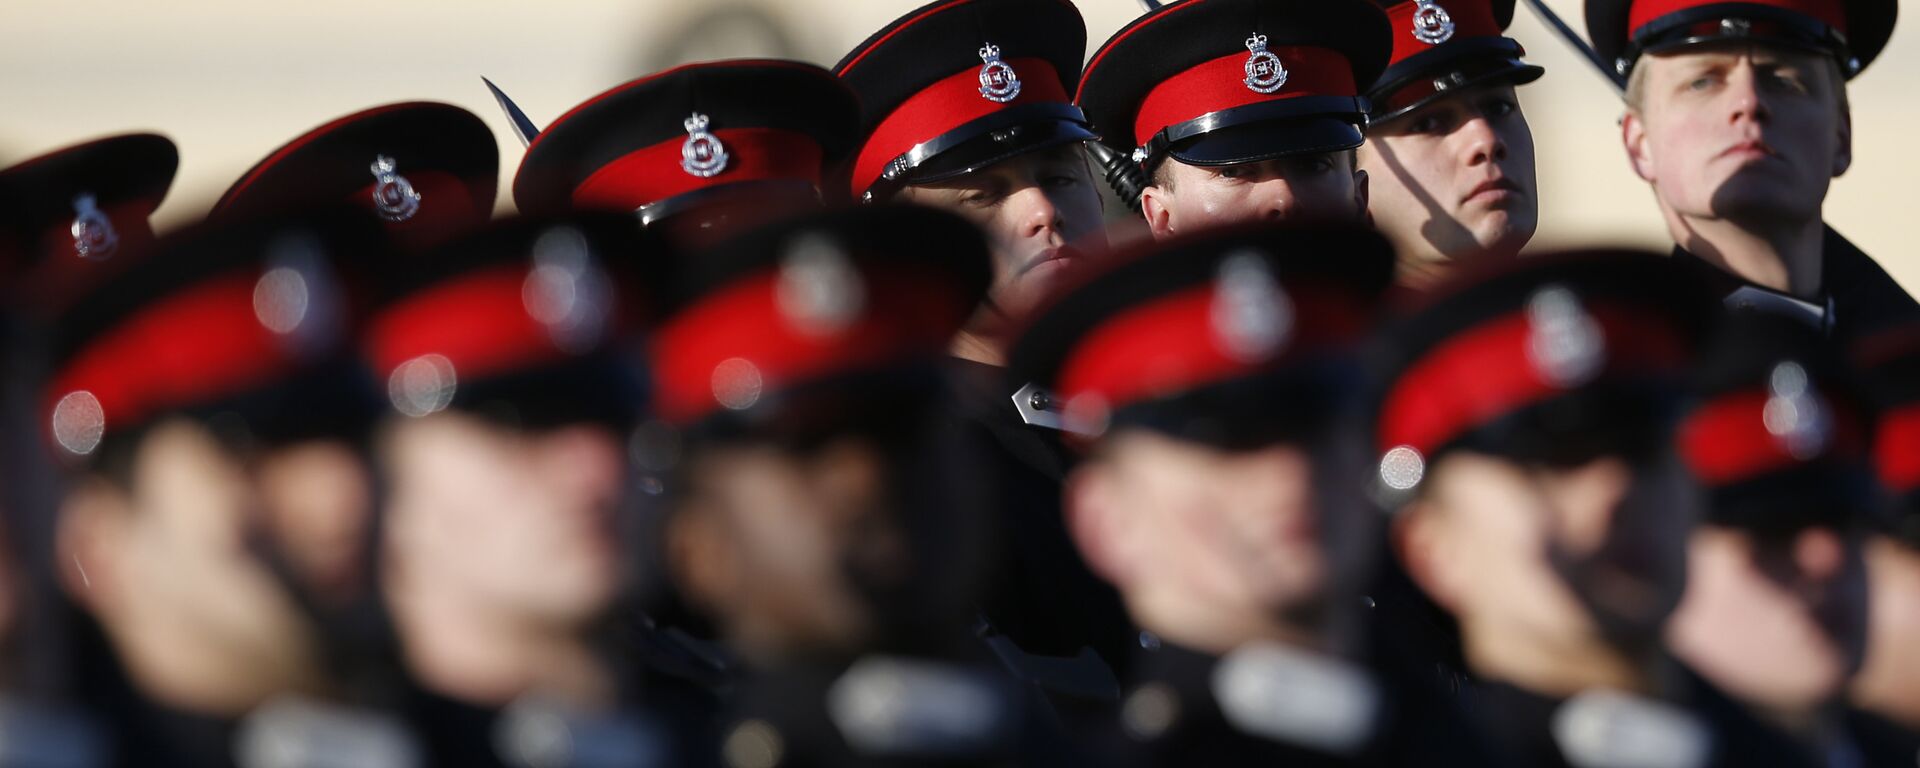 British Army officer cadets take part in Britain's Sovereign's Parade at The Royal Military Academy watched by Prince Harry, in Sandhurst, Berkshire, England , Friday, 15 December 2017. - Sputnik International, 1920, 19.11.2020